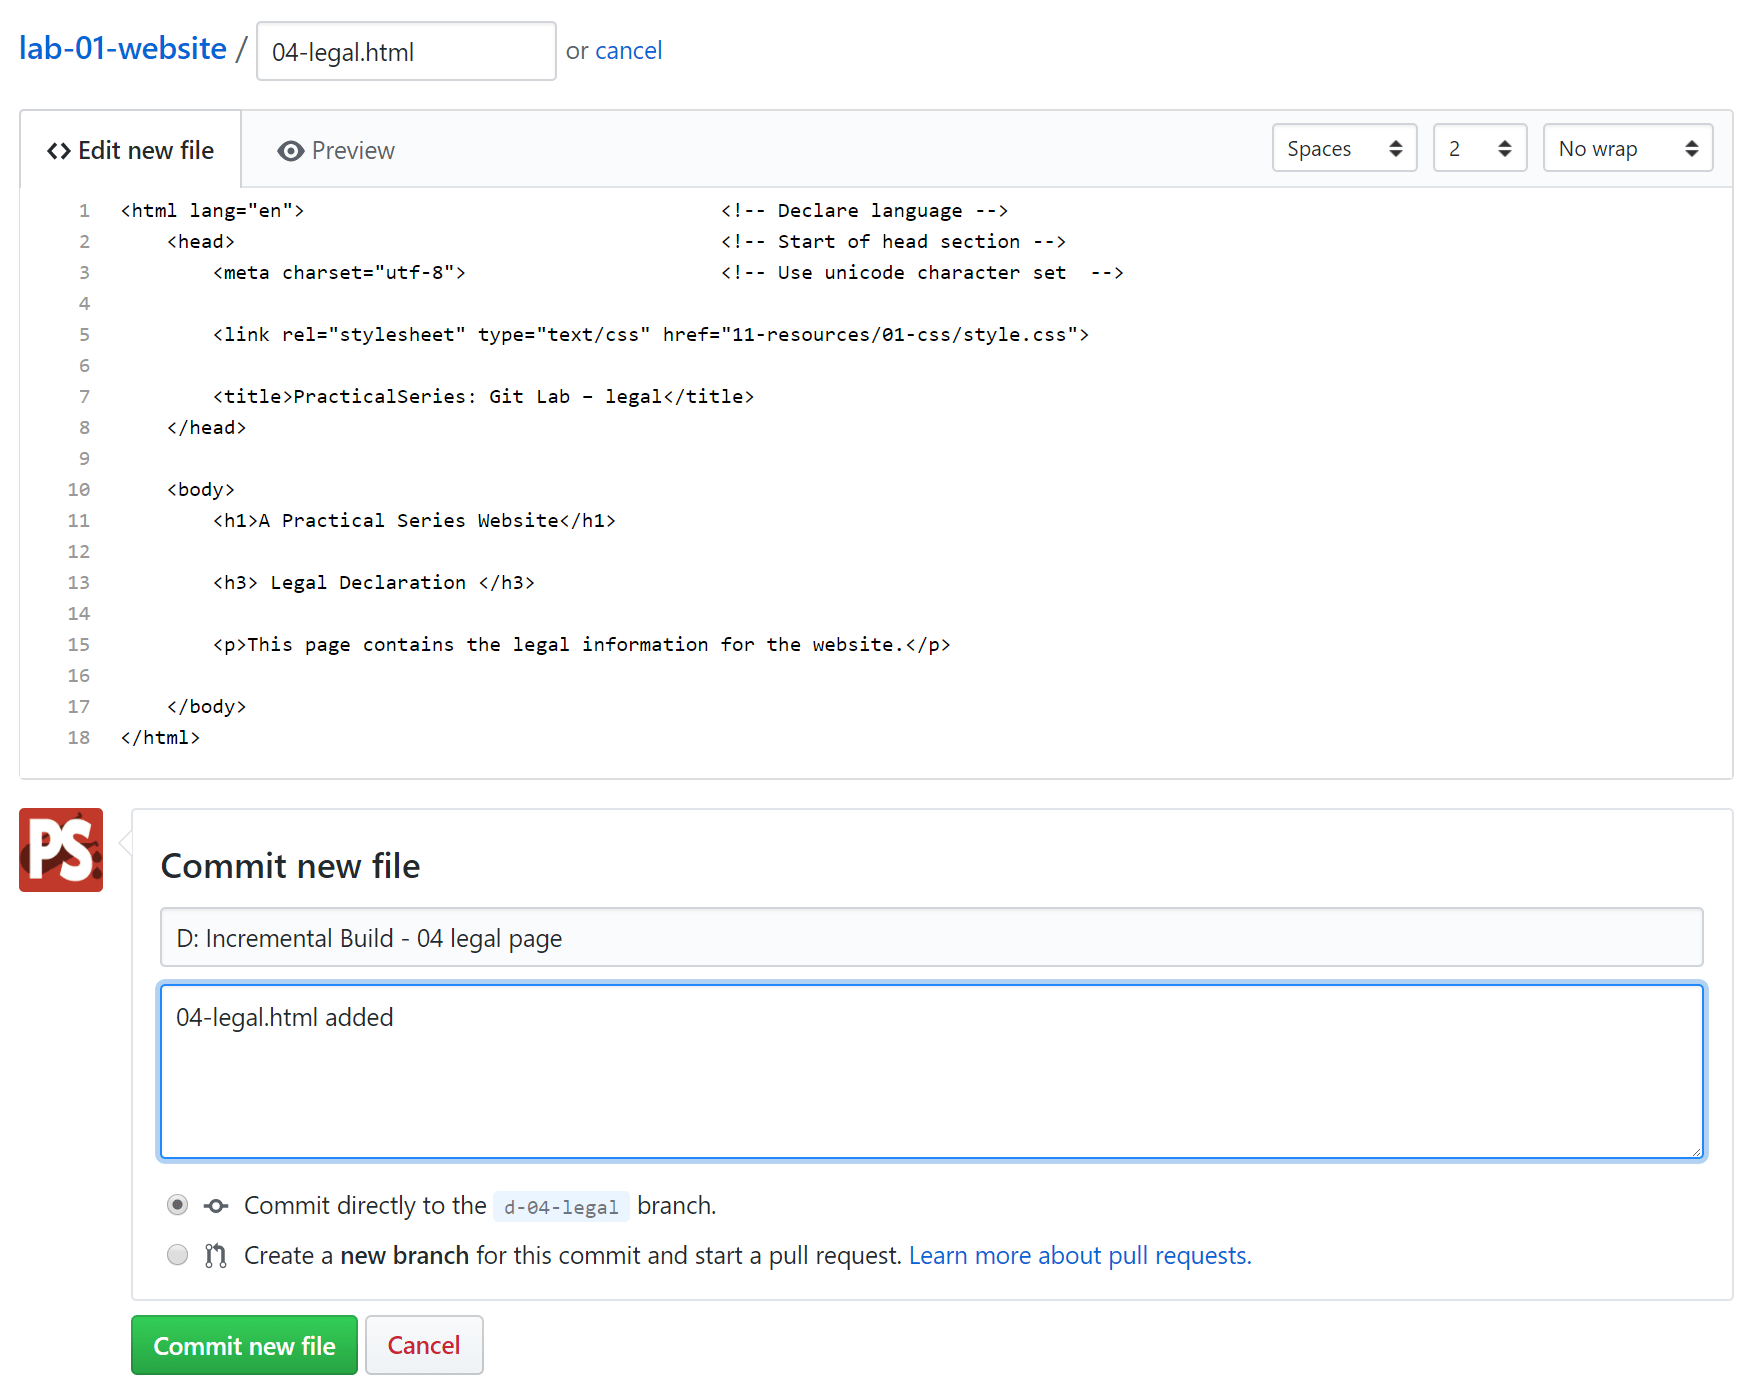 Figure 9.53 - GitHub—add a page to the d-04-legal branch